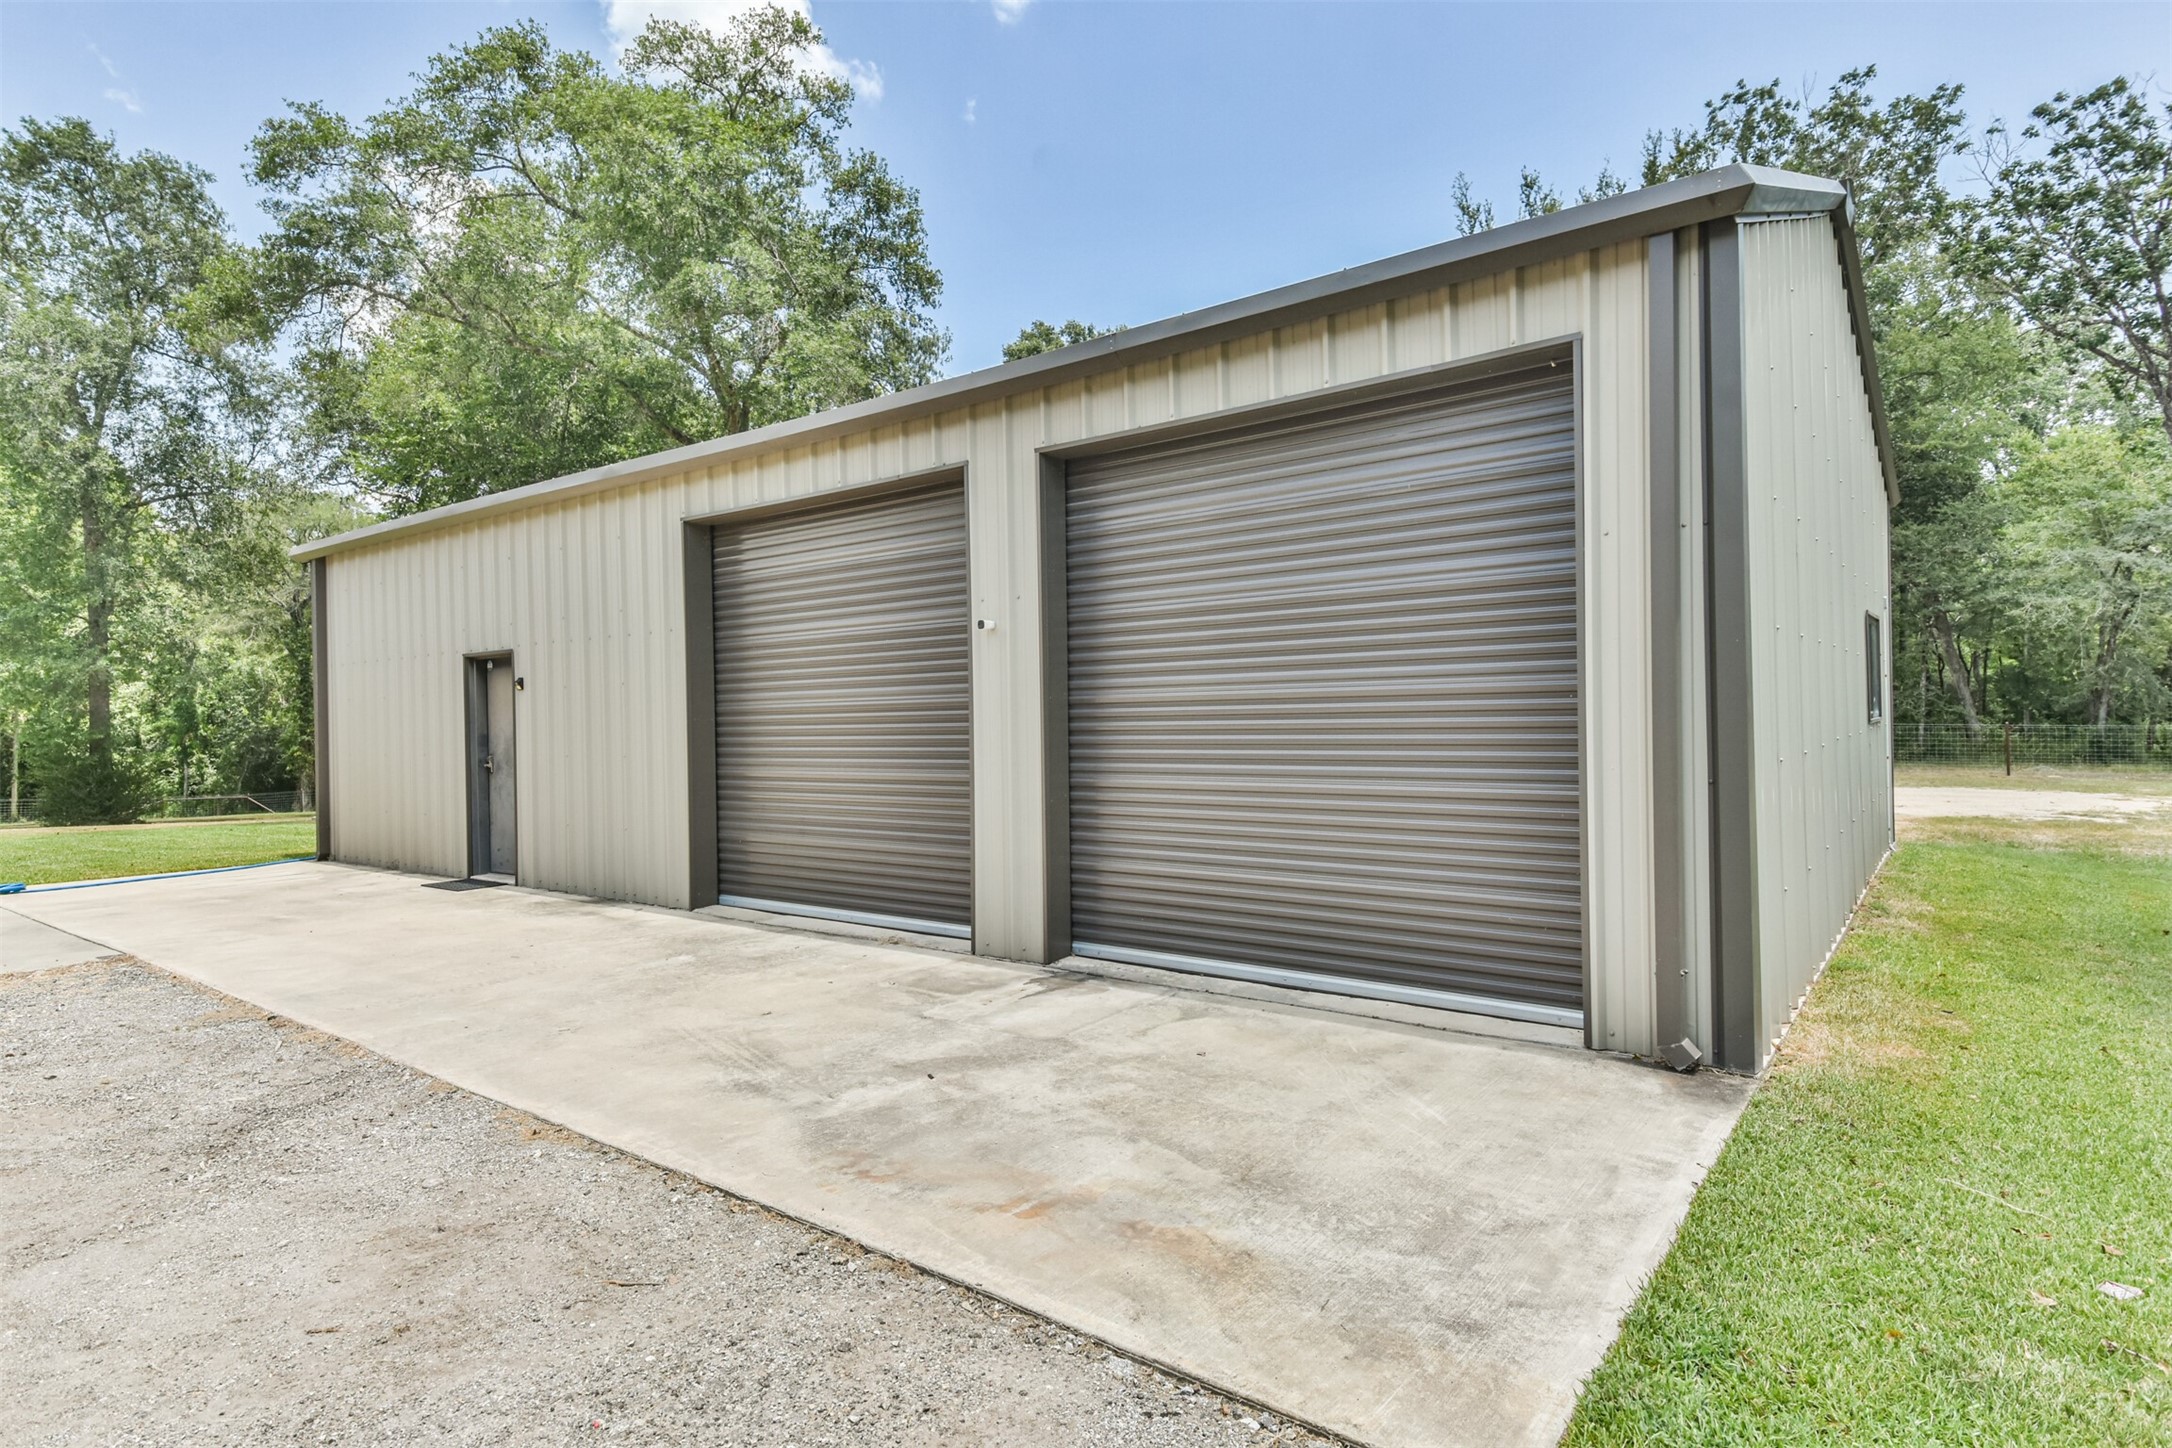 Shop with 3 roll up door, climate controlled area/man cave and bathroom.